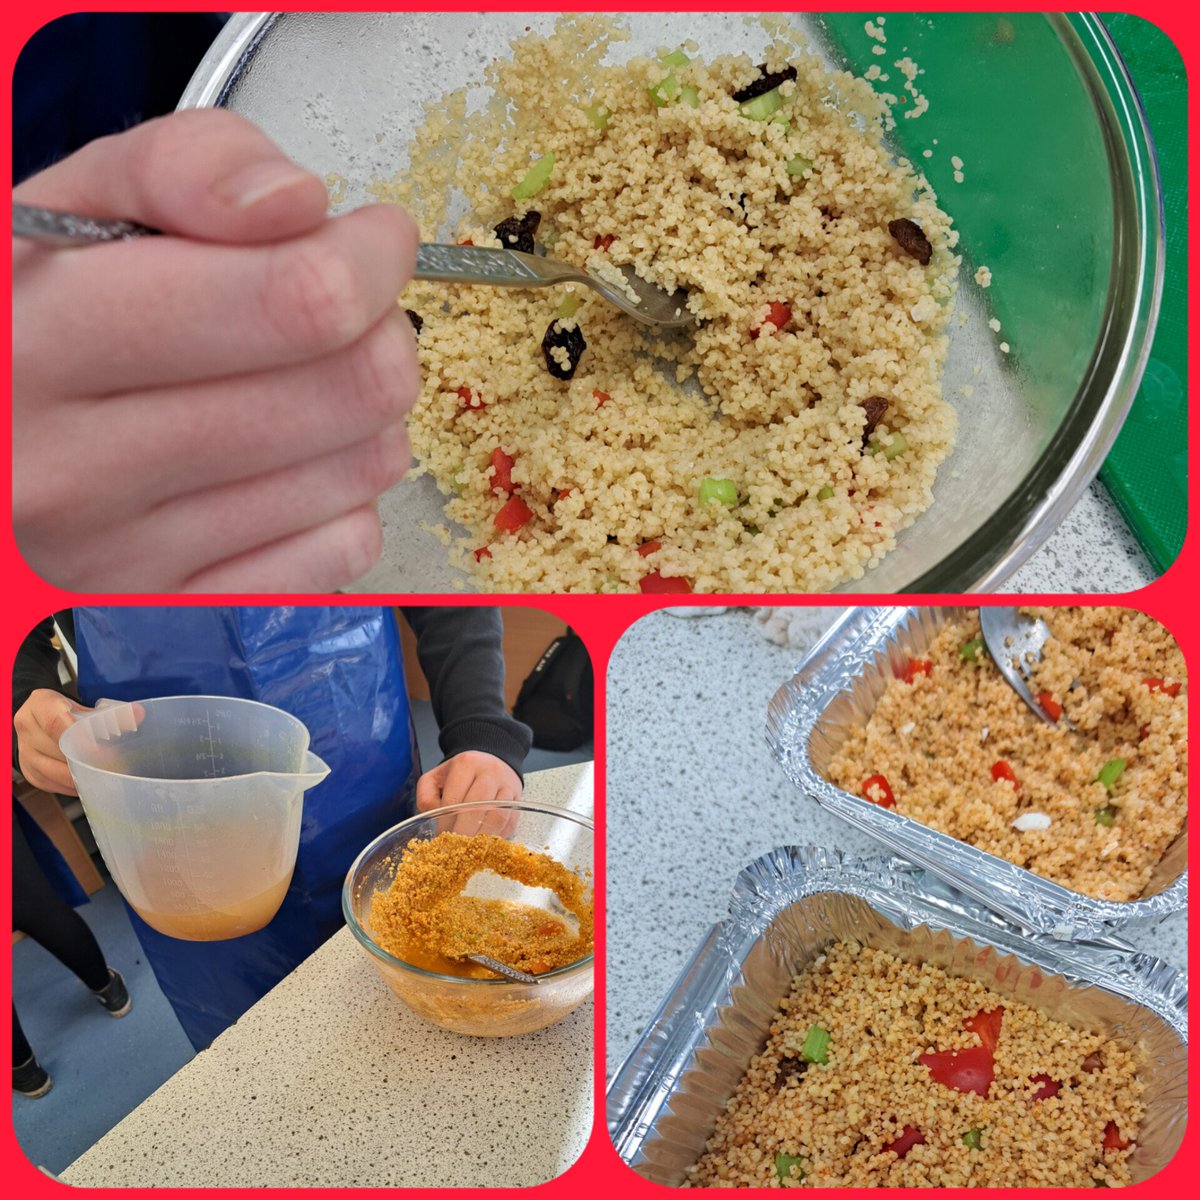 S2 practical assessments went well to design a couscous dish suitable for various life stages 👍🏻#BGE #HealthyEating